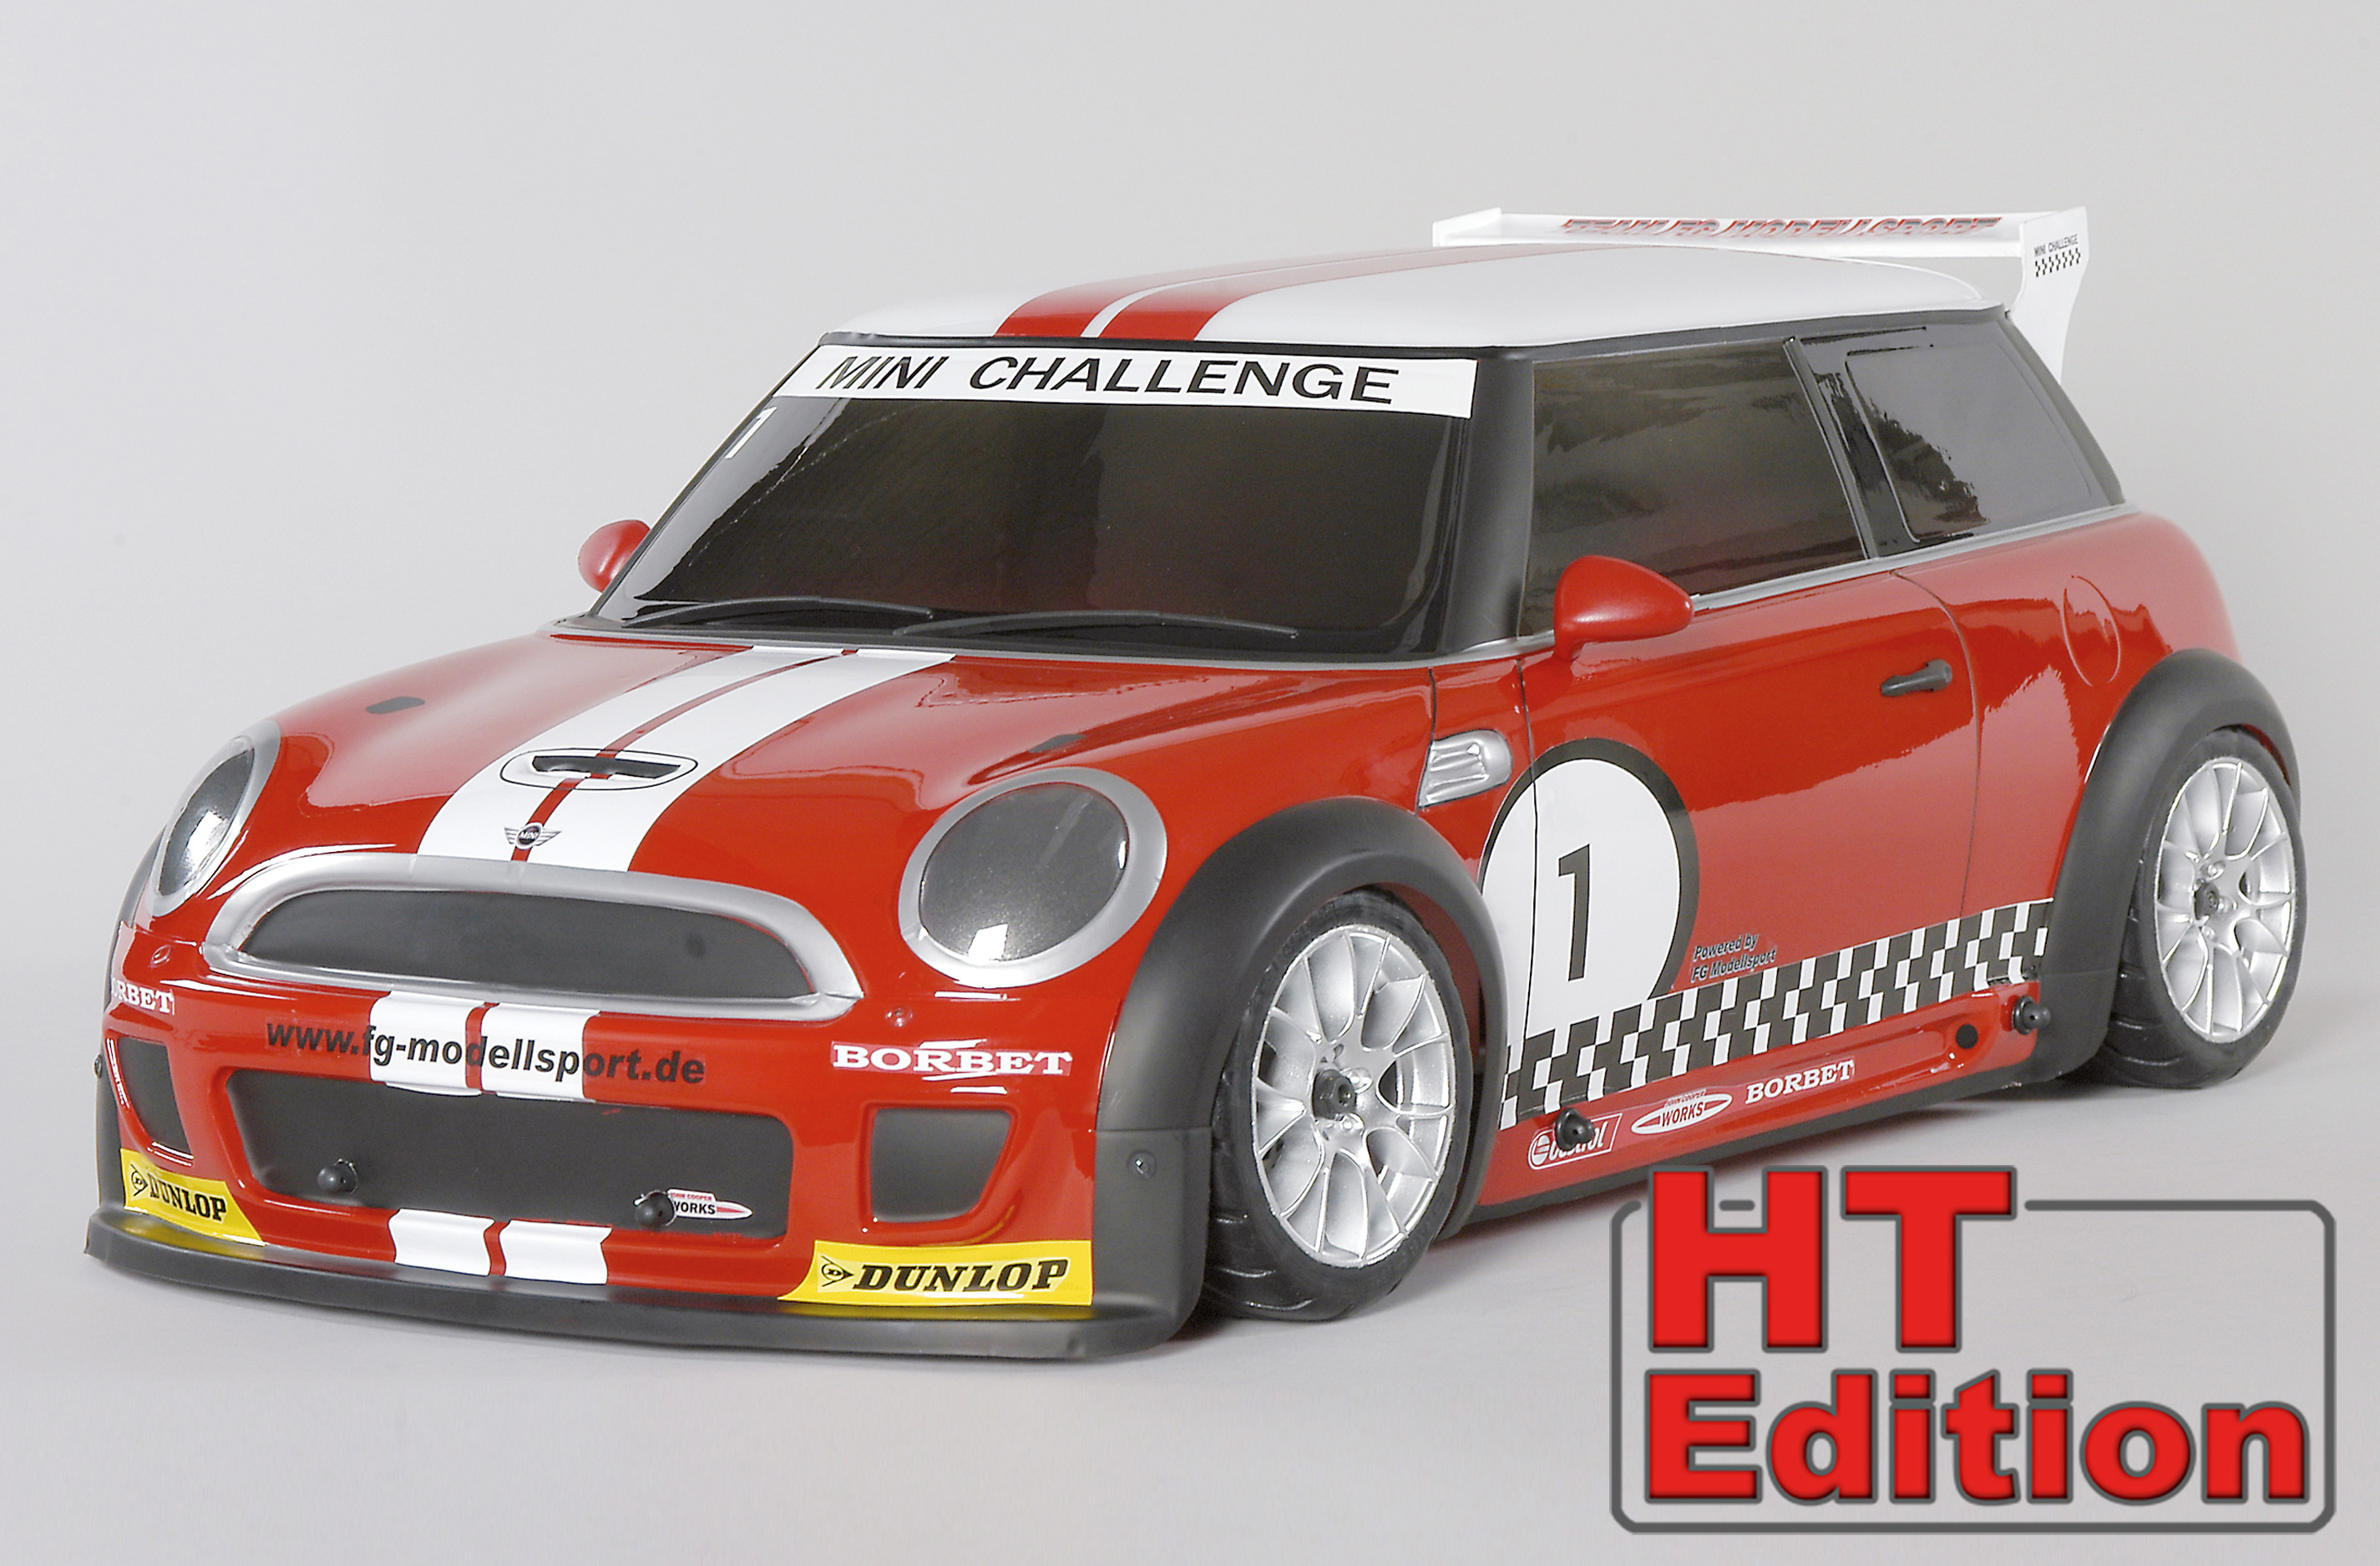 FG Sportsline 4WD-510 with Mini Cooper body HT-Edition